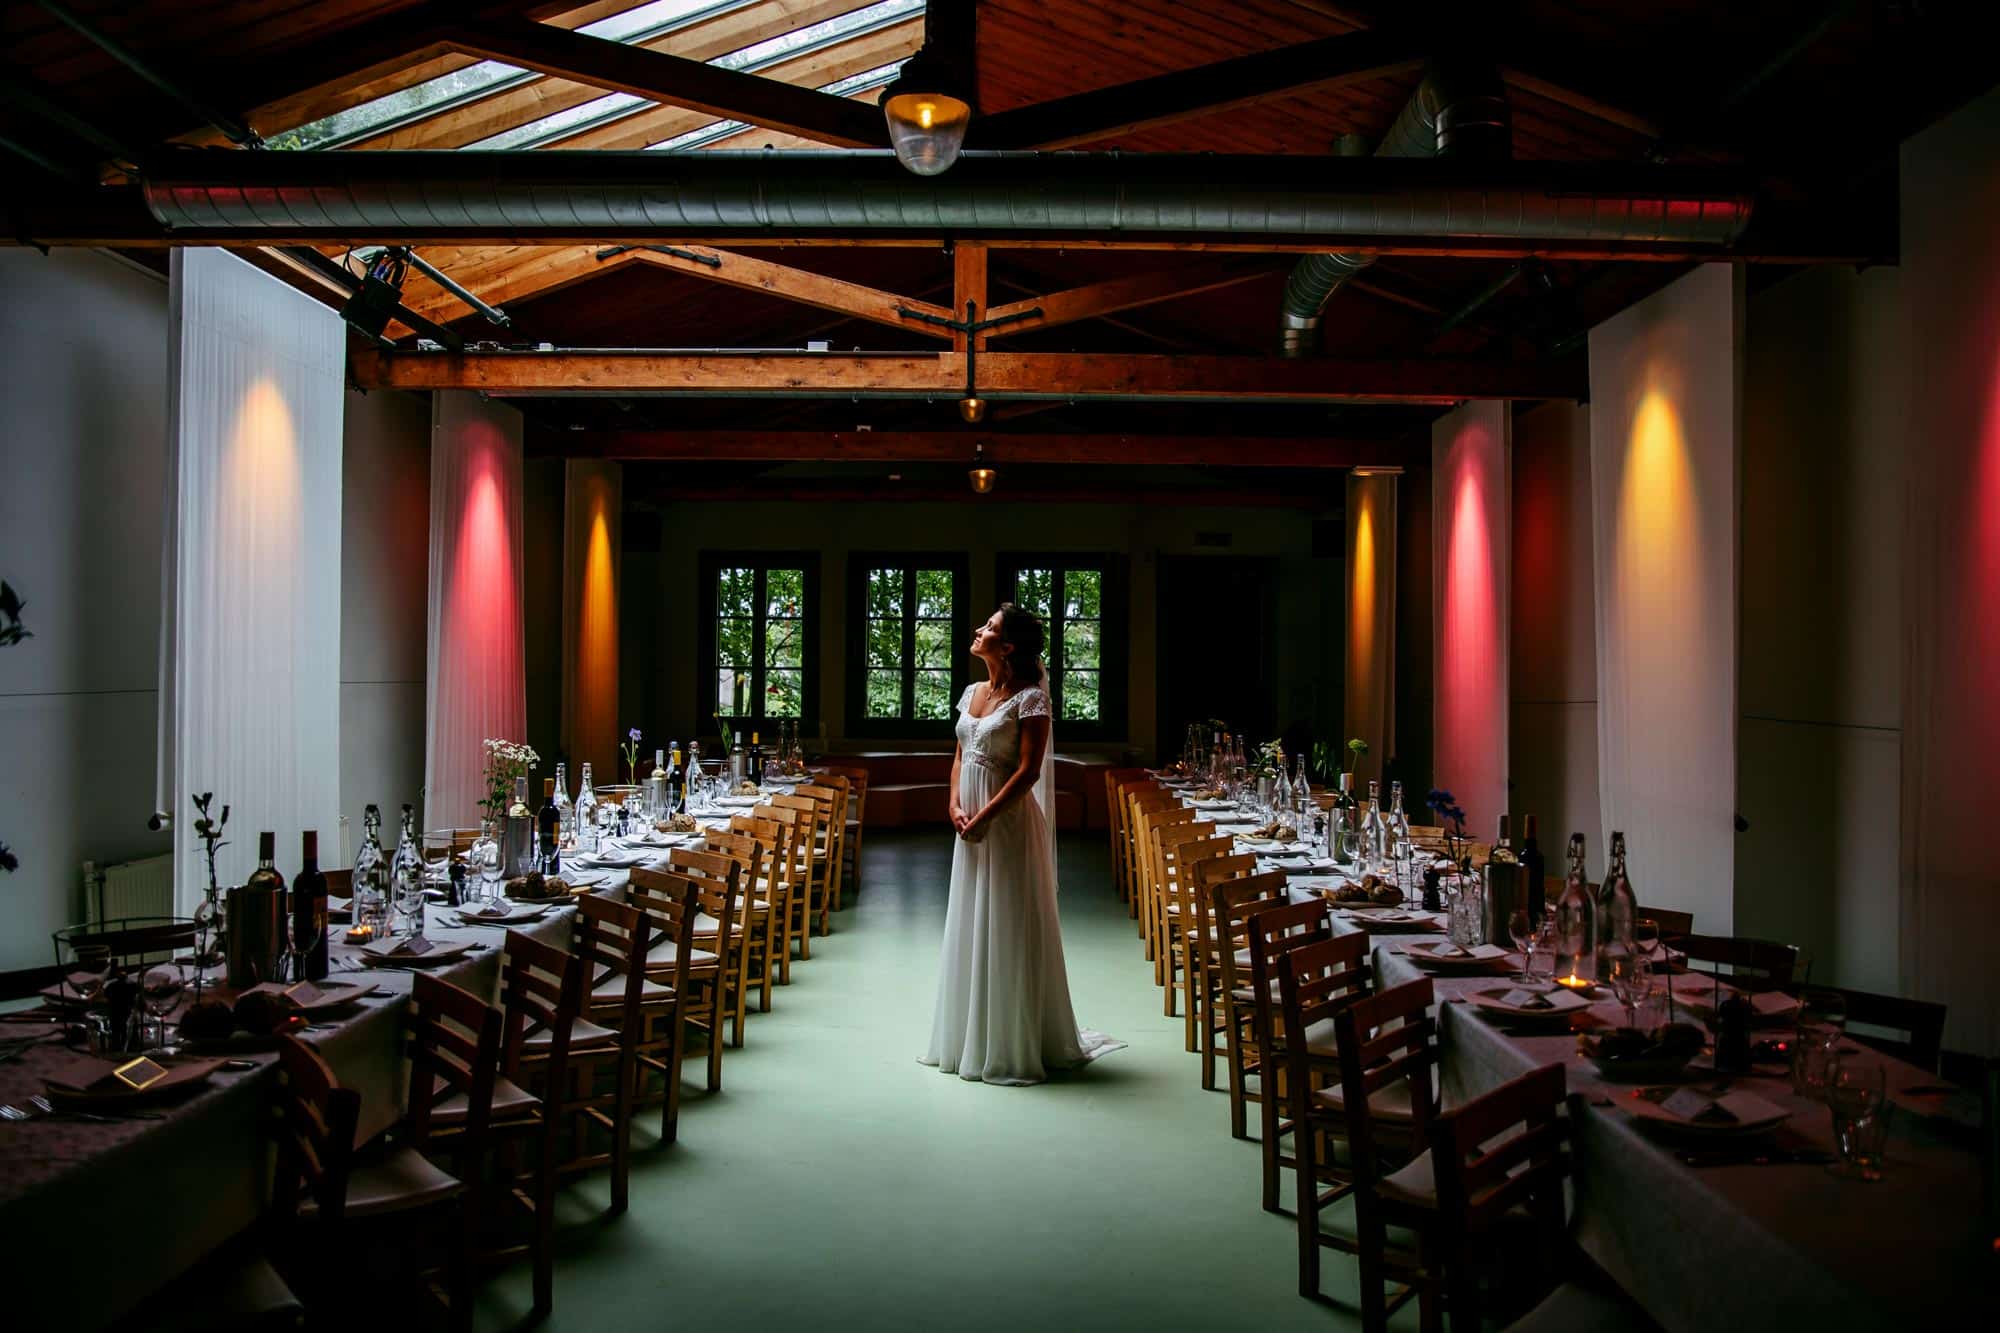 A bride standing in the middle of a room with tables and chairs.